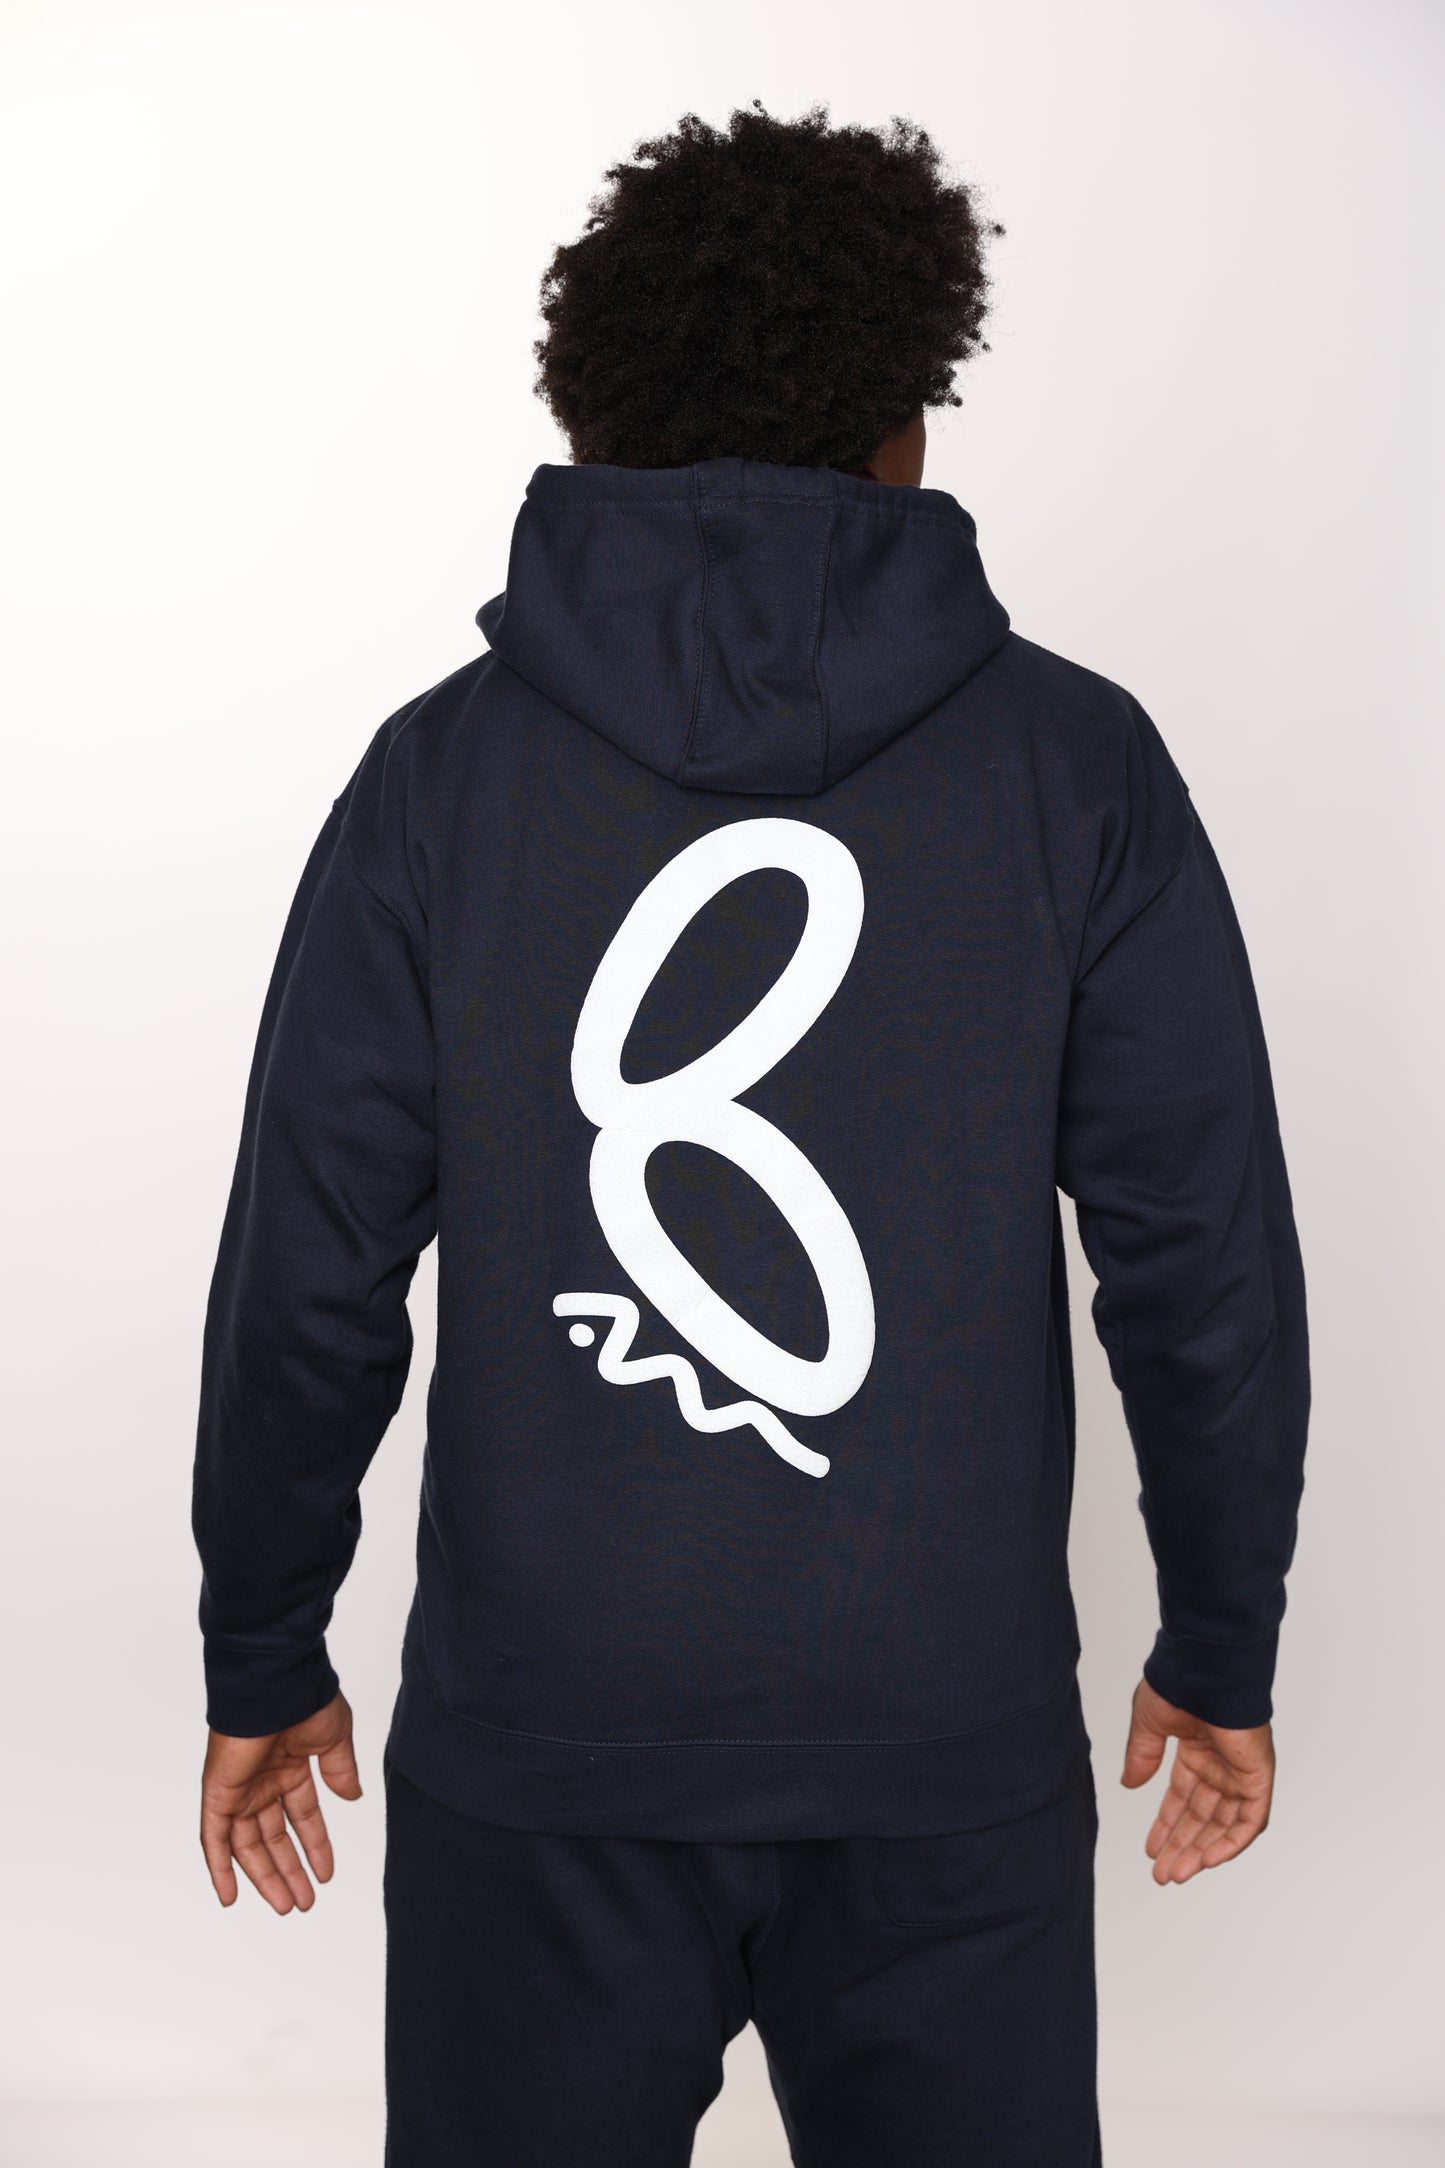 Ambitious & Motivated Hoodie - Navy Blue